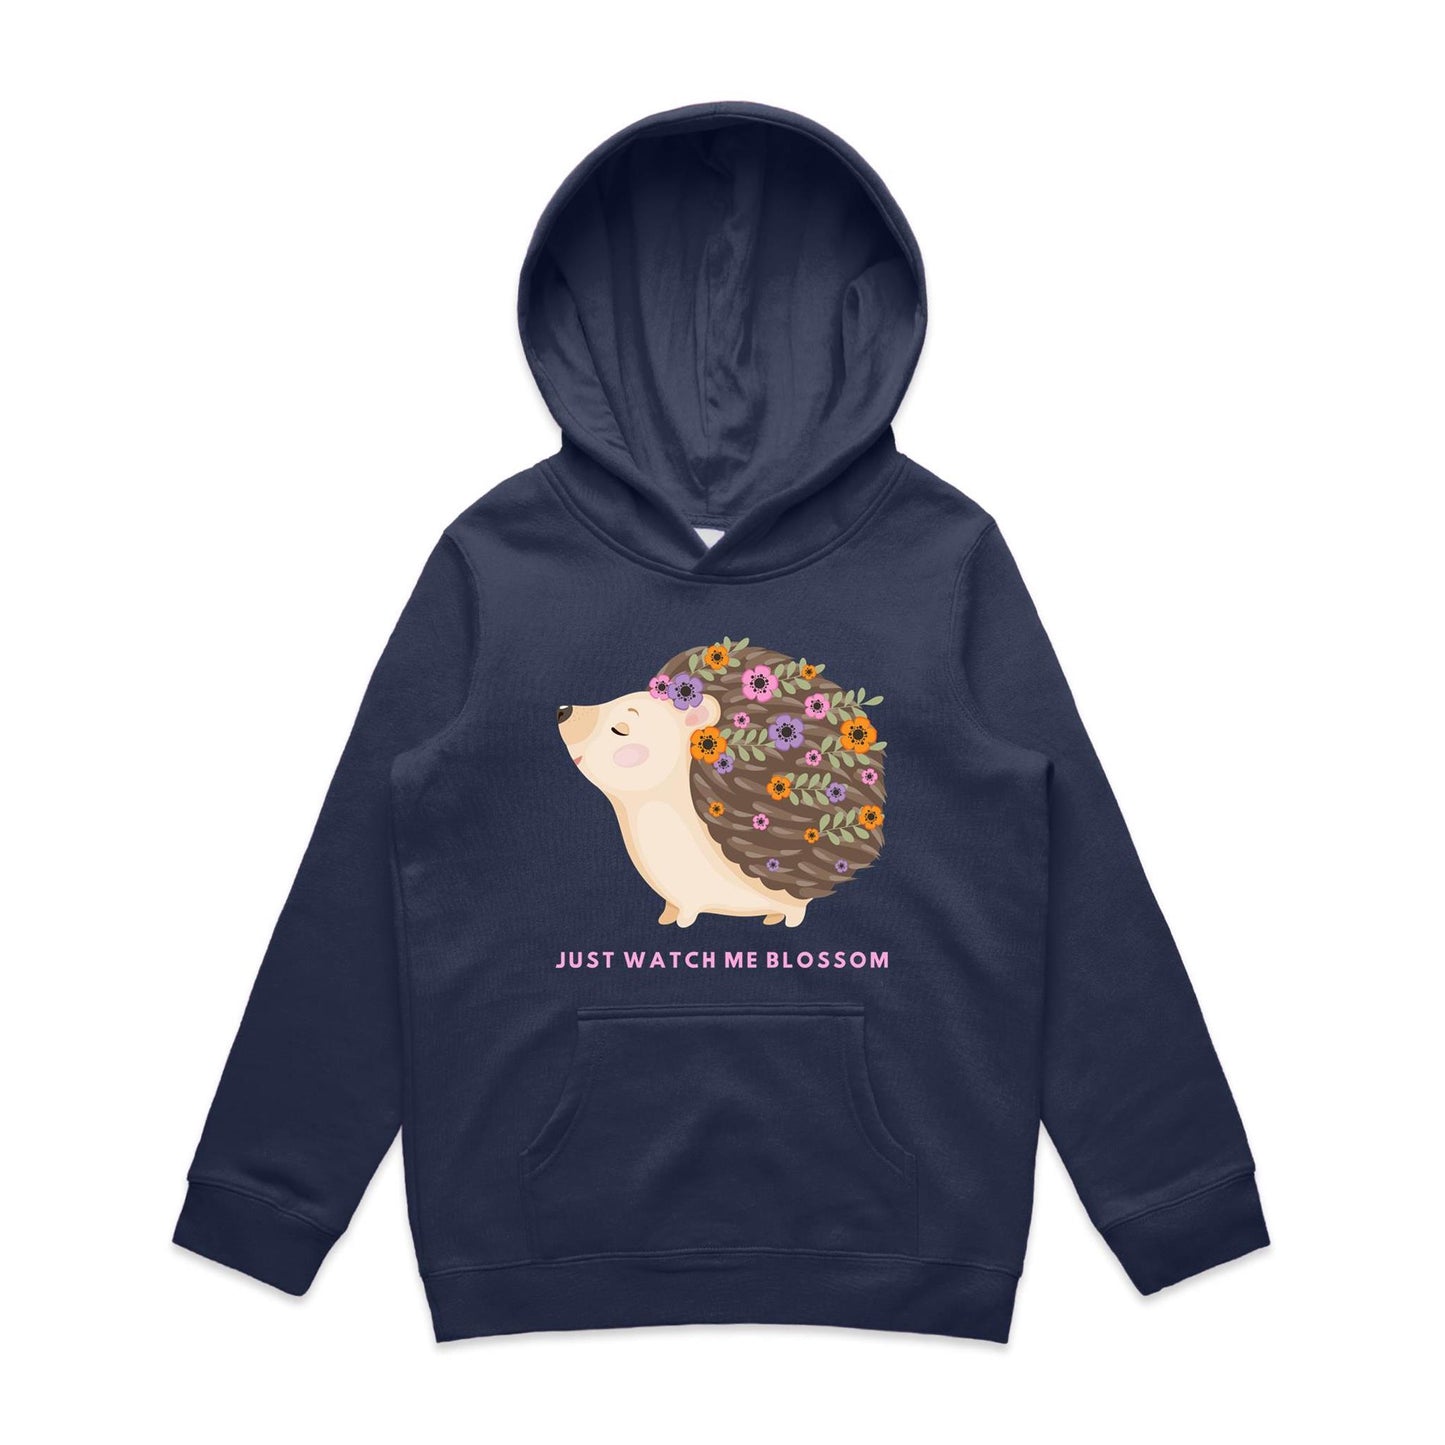 Just Watch Me Blossom - Youth Supply Hood Midnight Blue Kids Hoodie animal